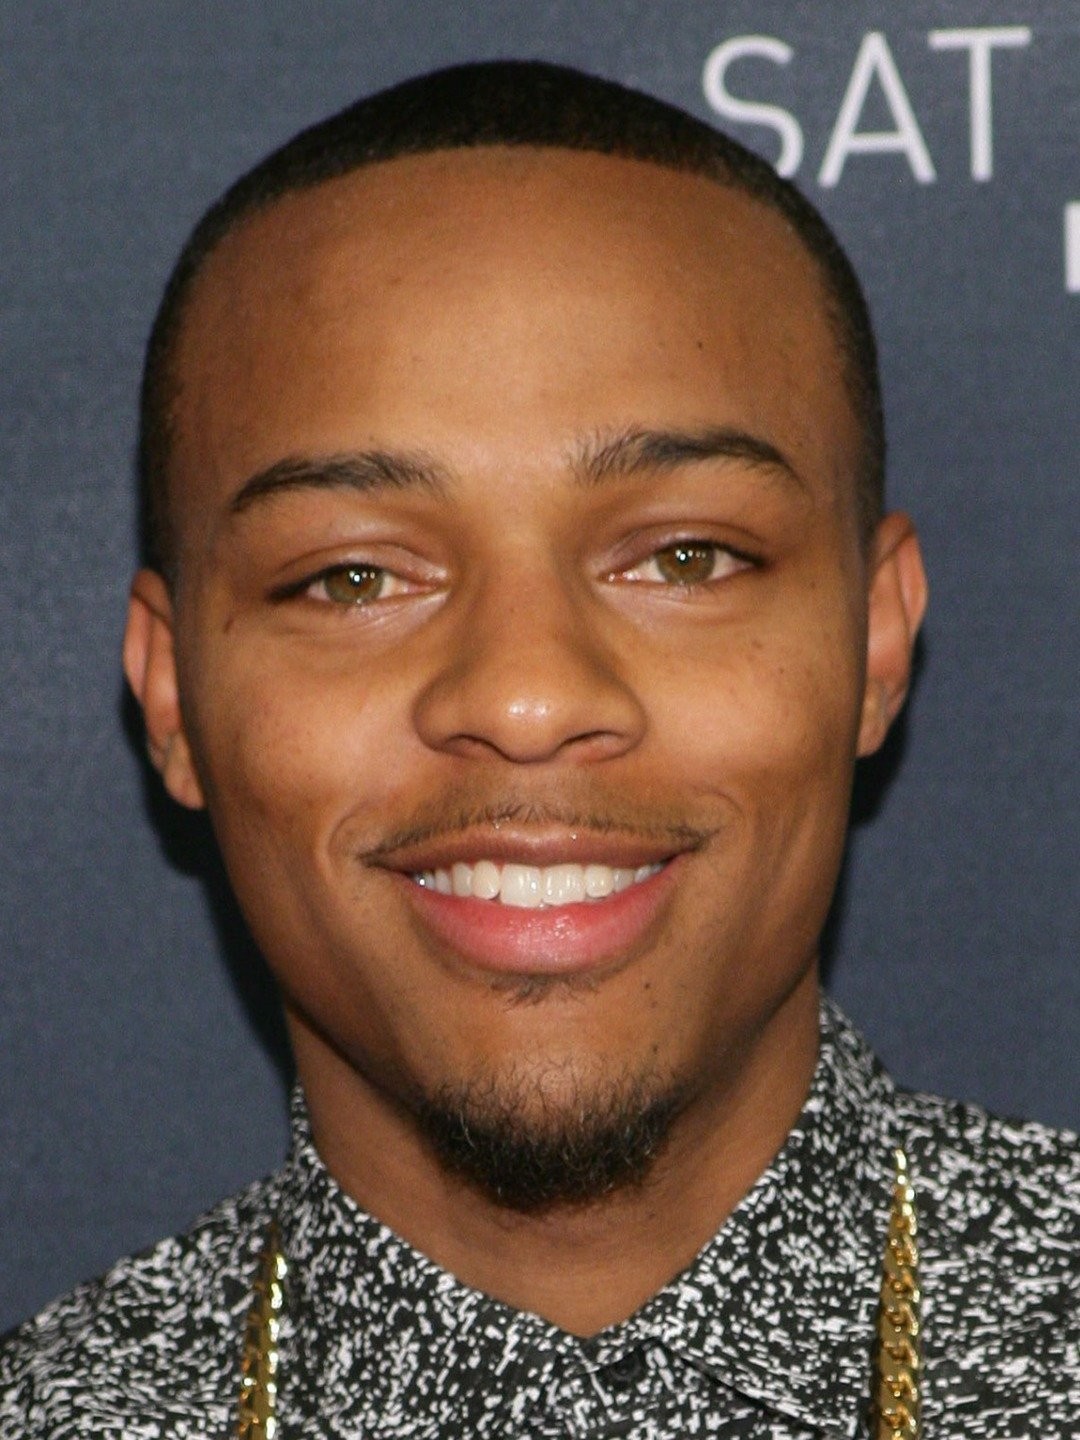 Bow Wow apologizes after crowded Houston club backlash